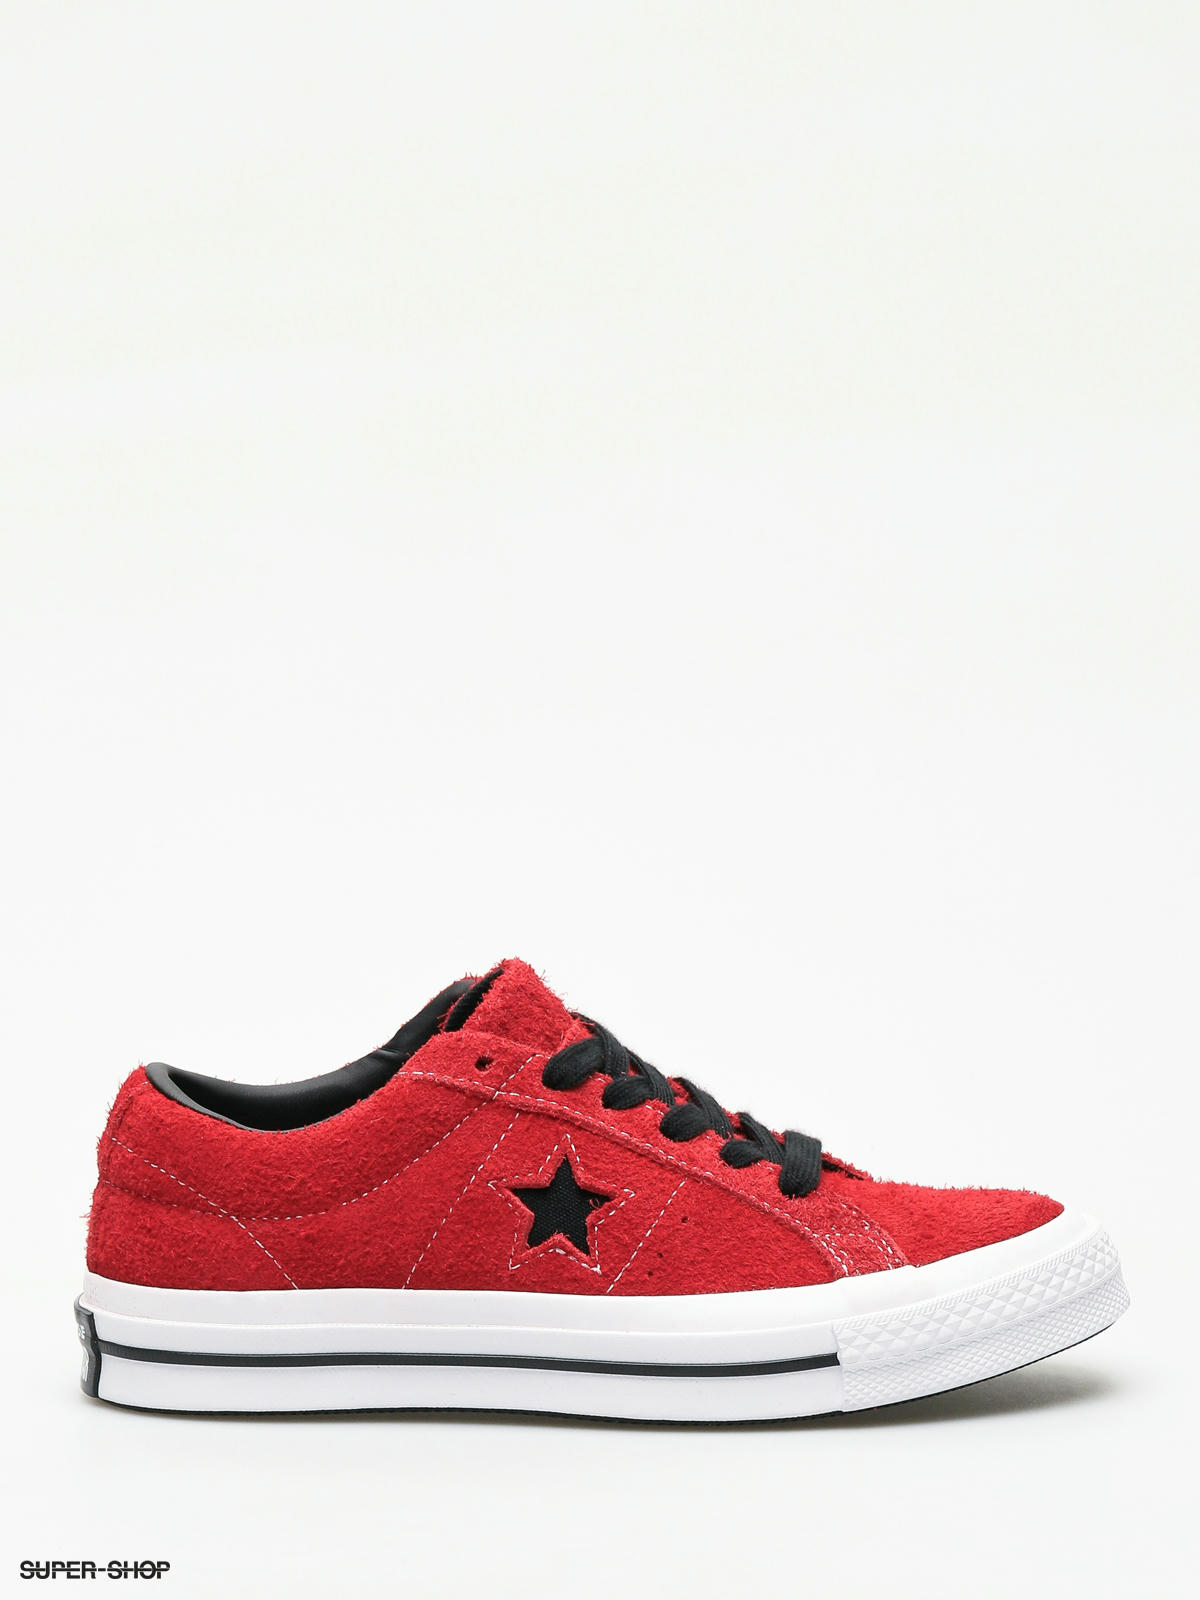 converse red black shoes